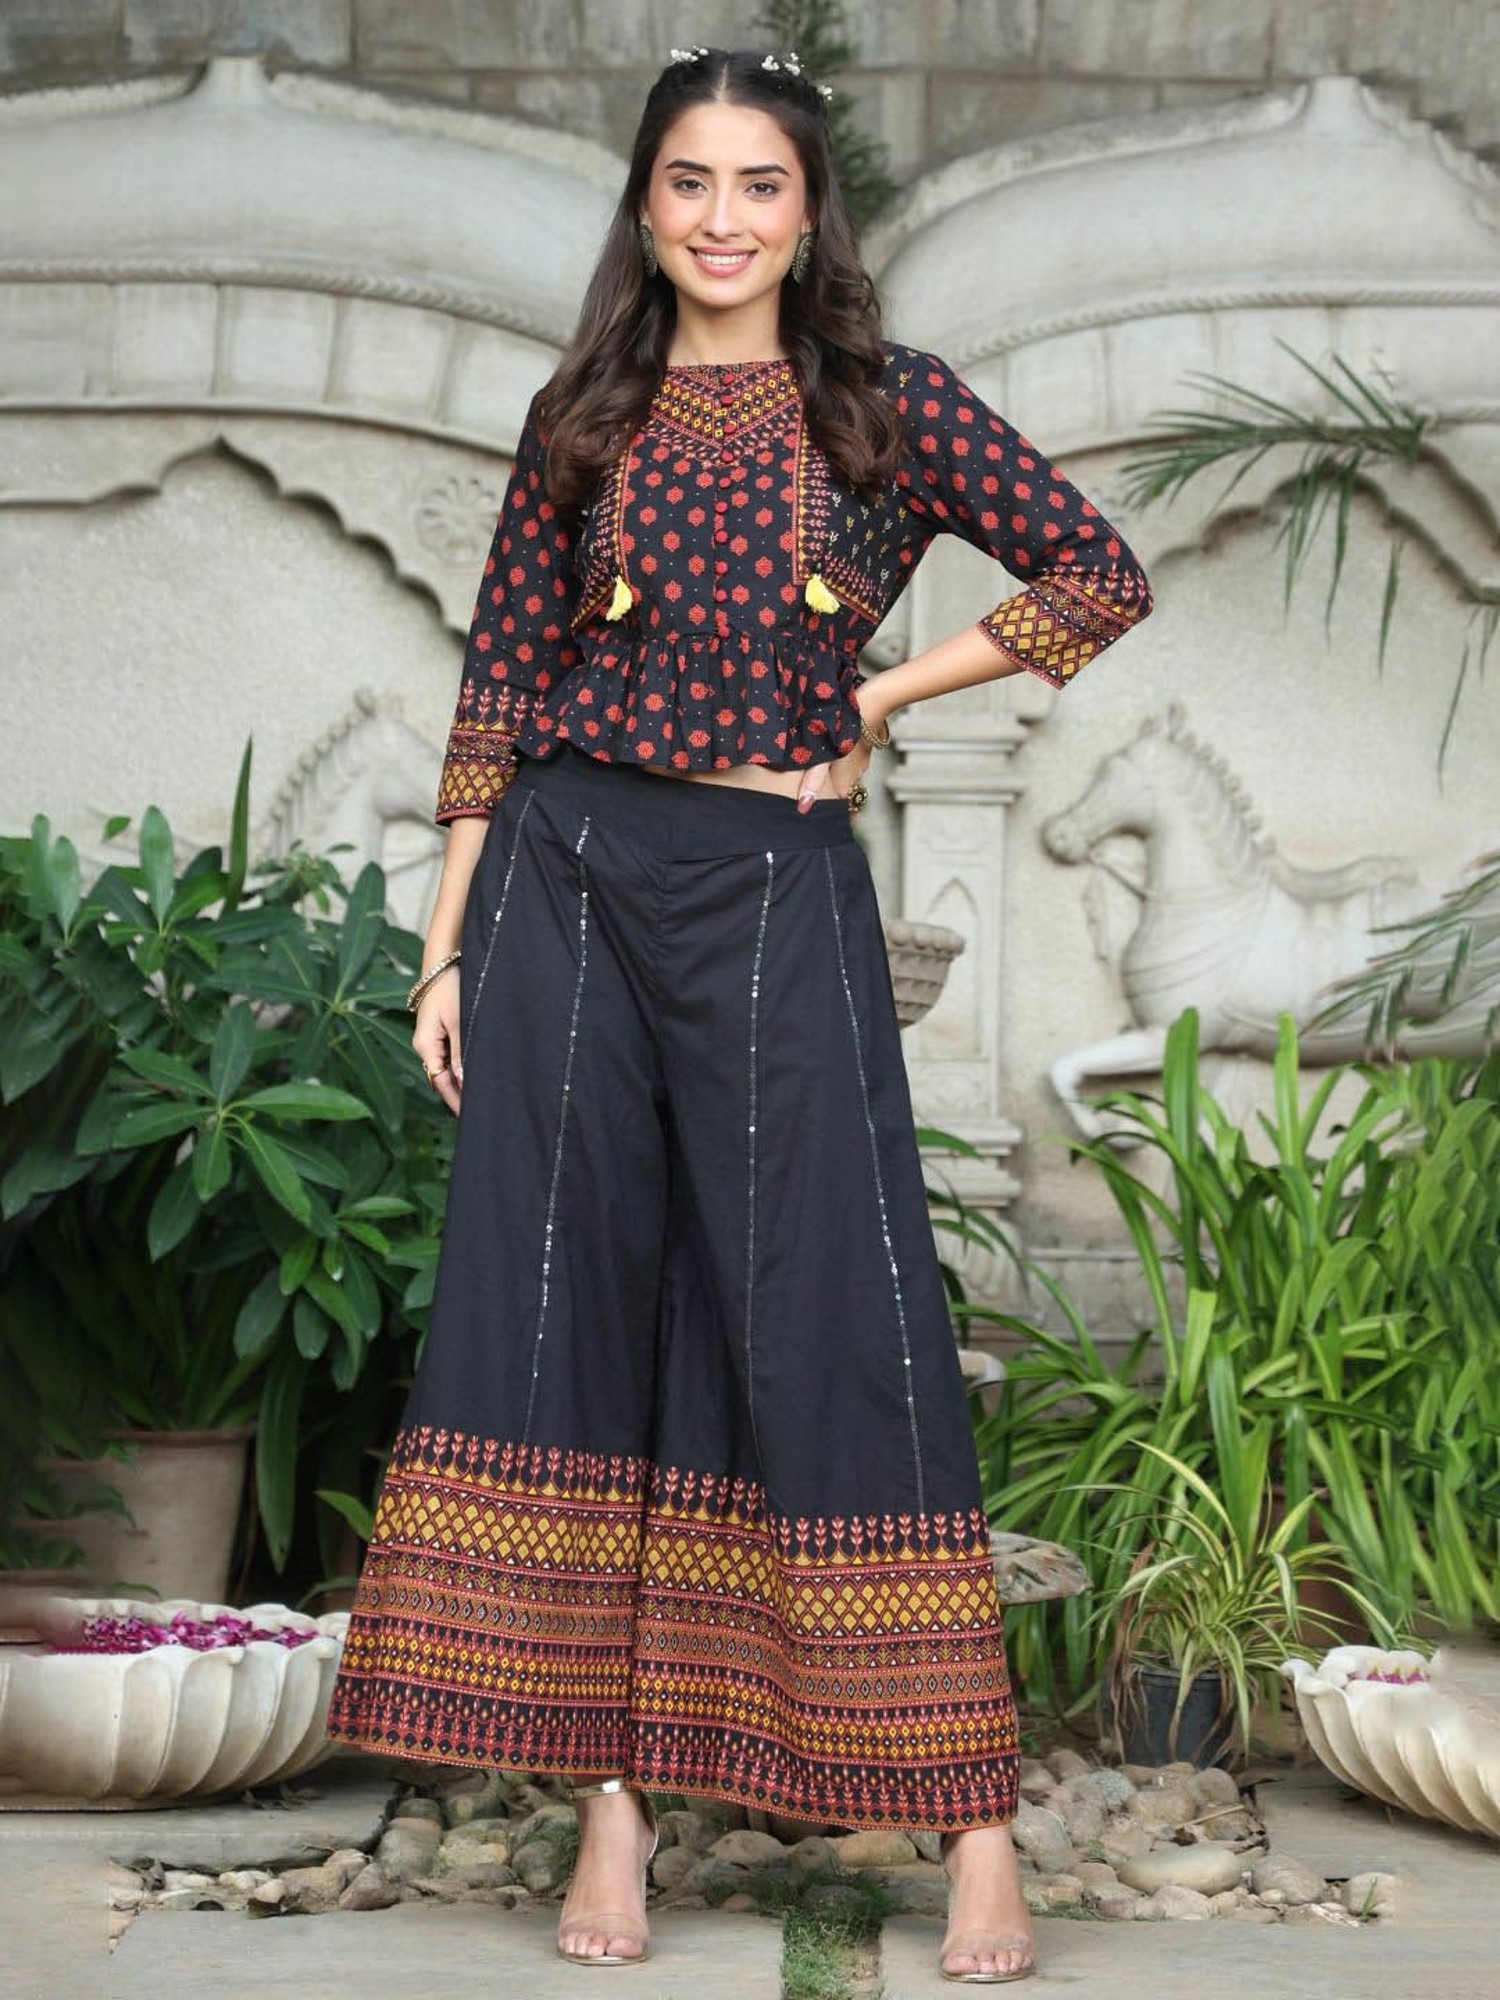 How to Wear Hippie Pants for Women  25 Outfit Ideas